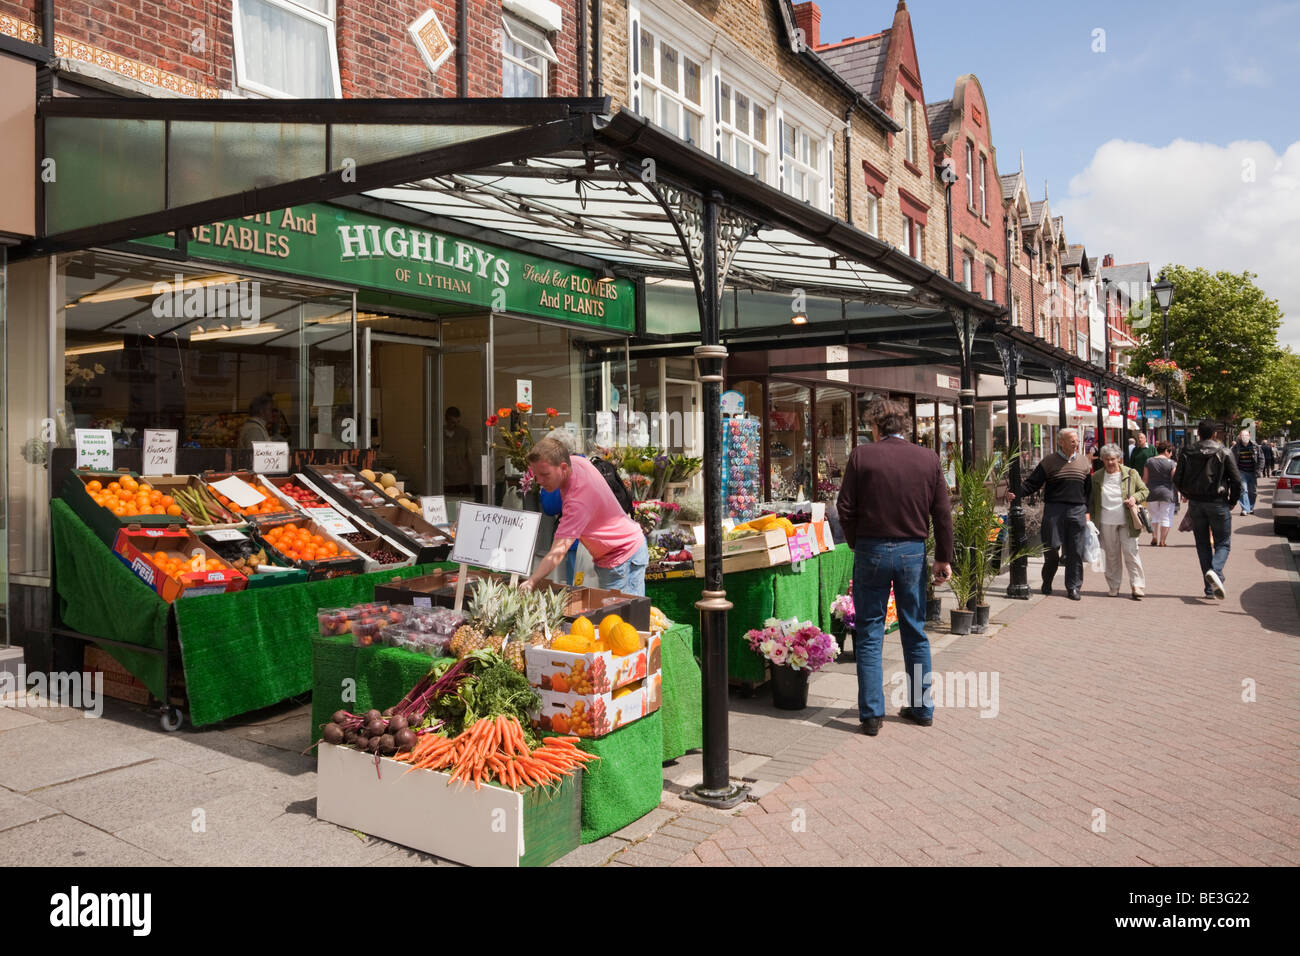 Lytham St Annes, Lancashire, England, UK. Small shops with green grocers selling fruit and vegetable on display outside Stock Photo